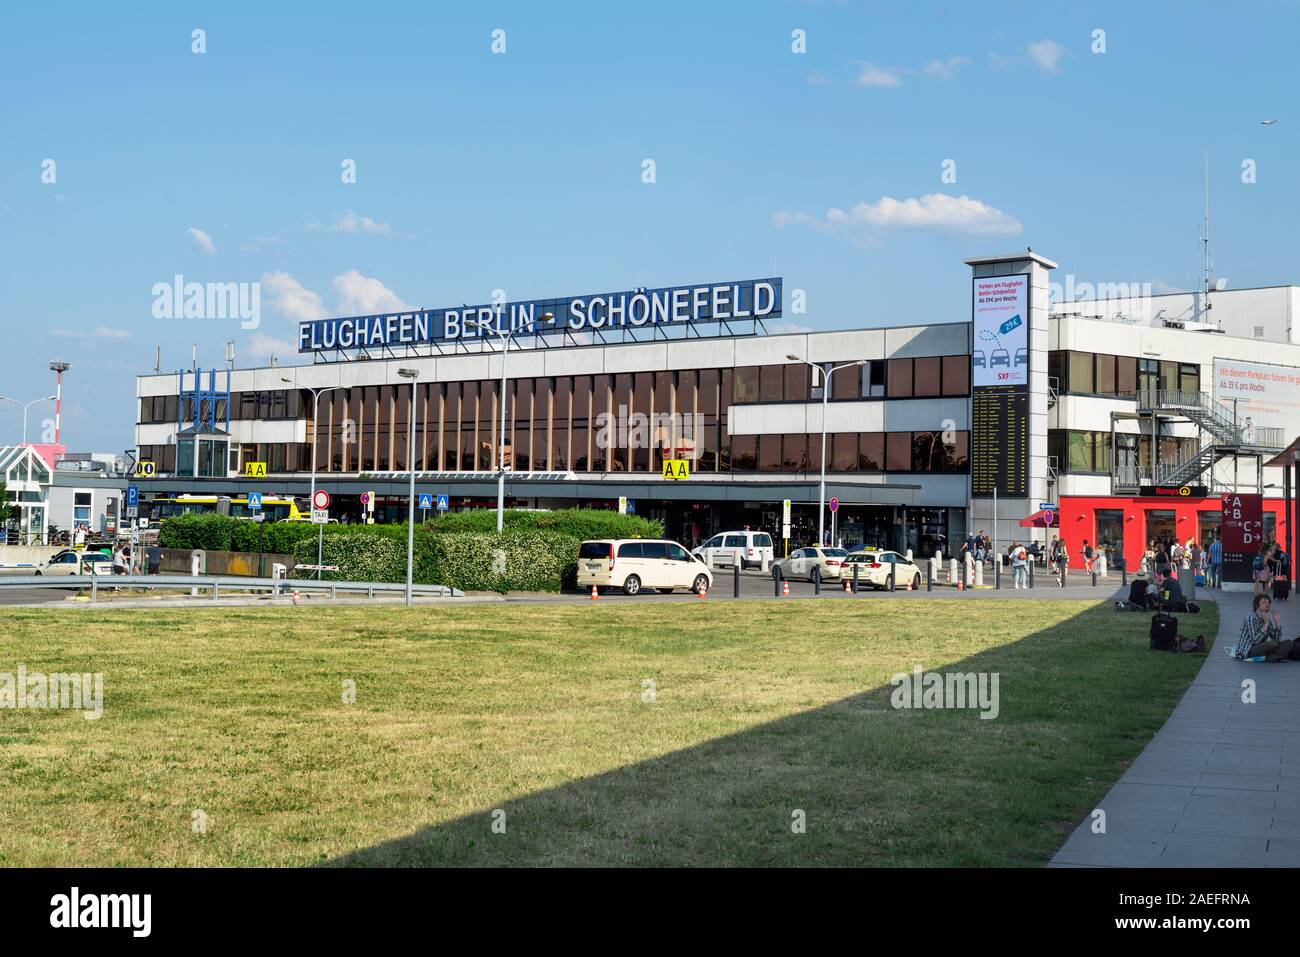 BERLIN, GERMANY - MAY 28, 2018: A view of the facade of the Flughafen Berlin Schonefeld, the Schonefeld Airport in Berlin, Germany Stock Photo